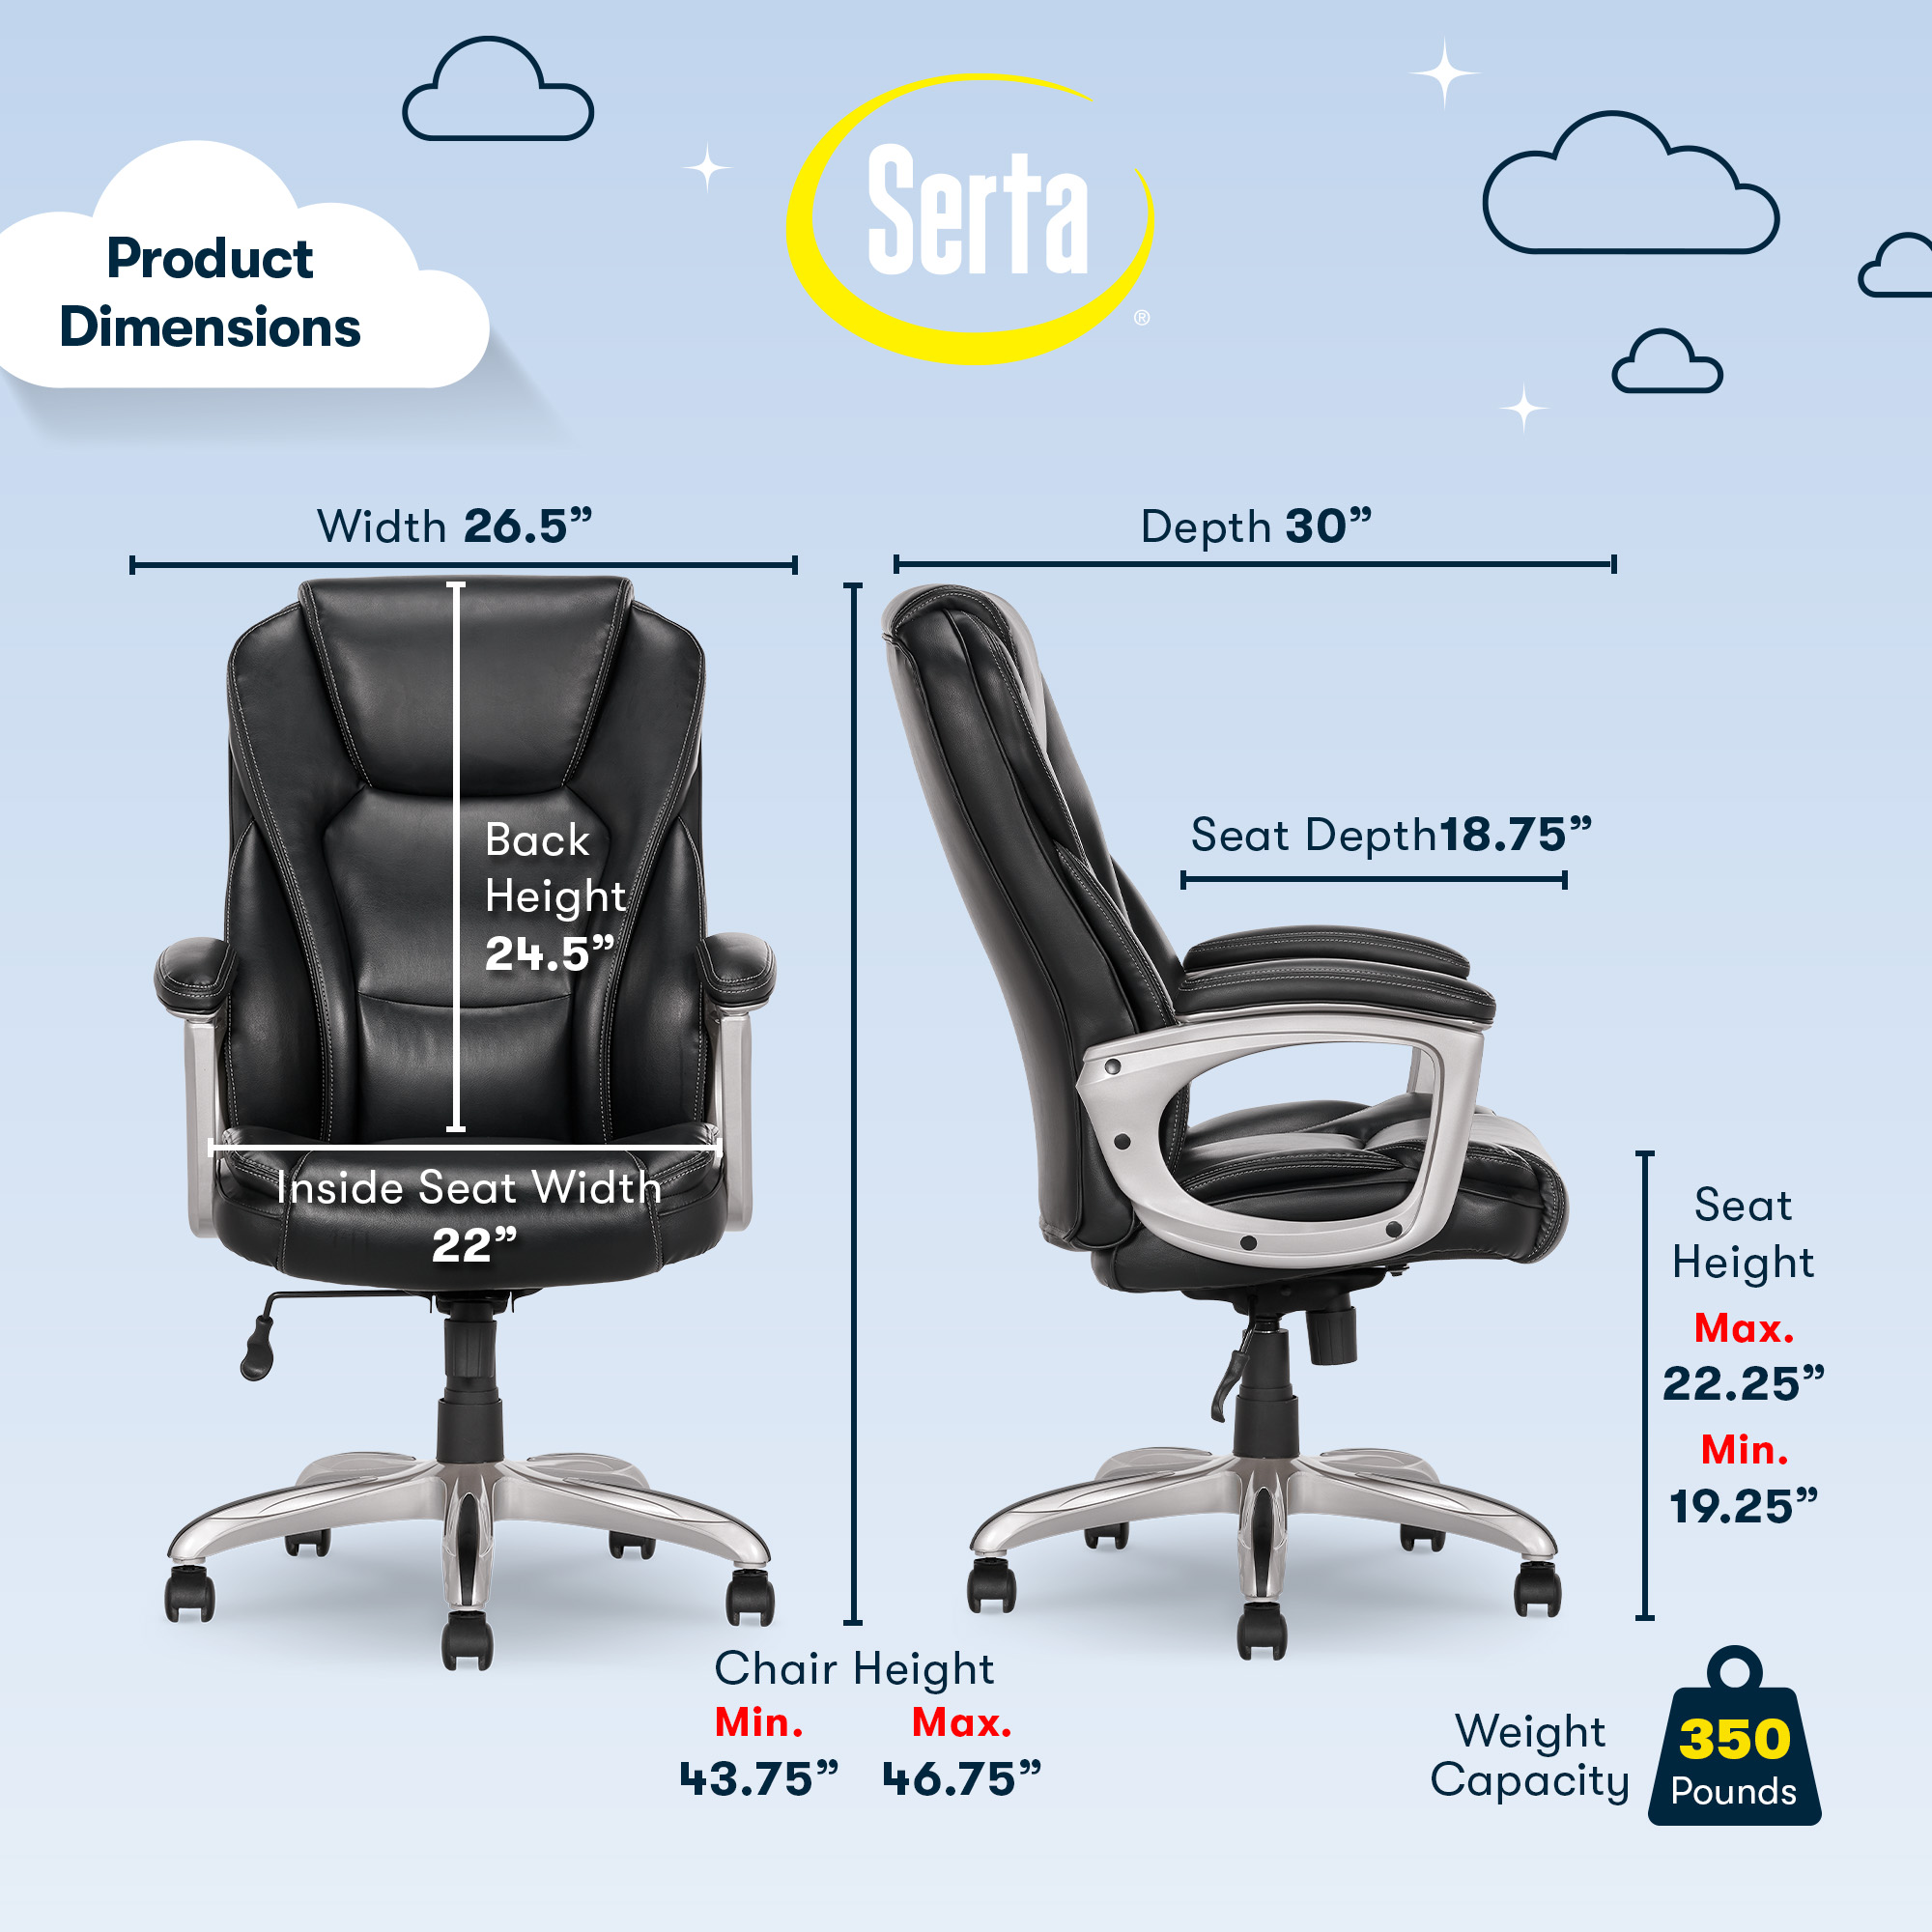 Serta Heavy-Duty Bonded Leather Commercial Office Chair with Memory Foam, 350 lb capacity, Black - image 5 of 9